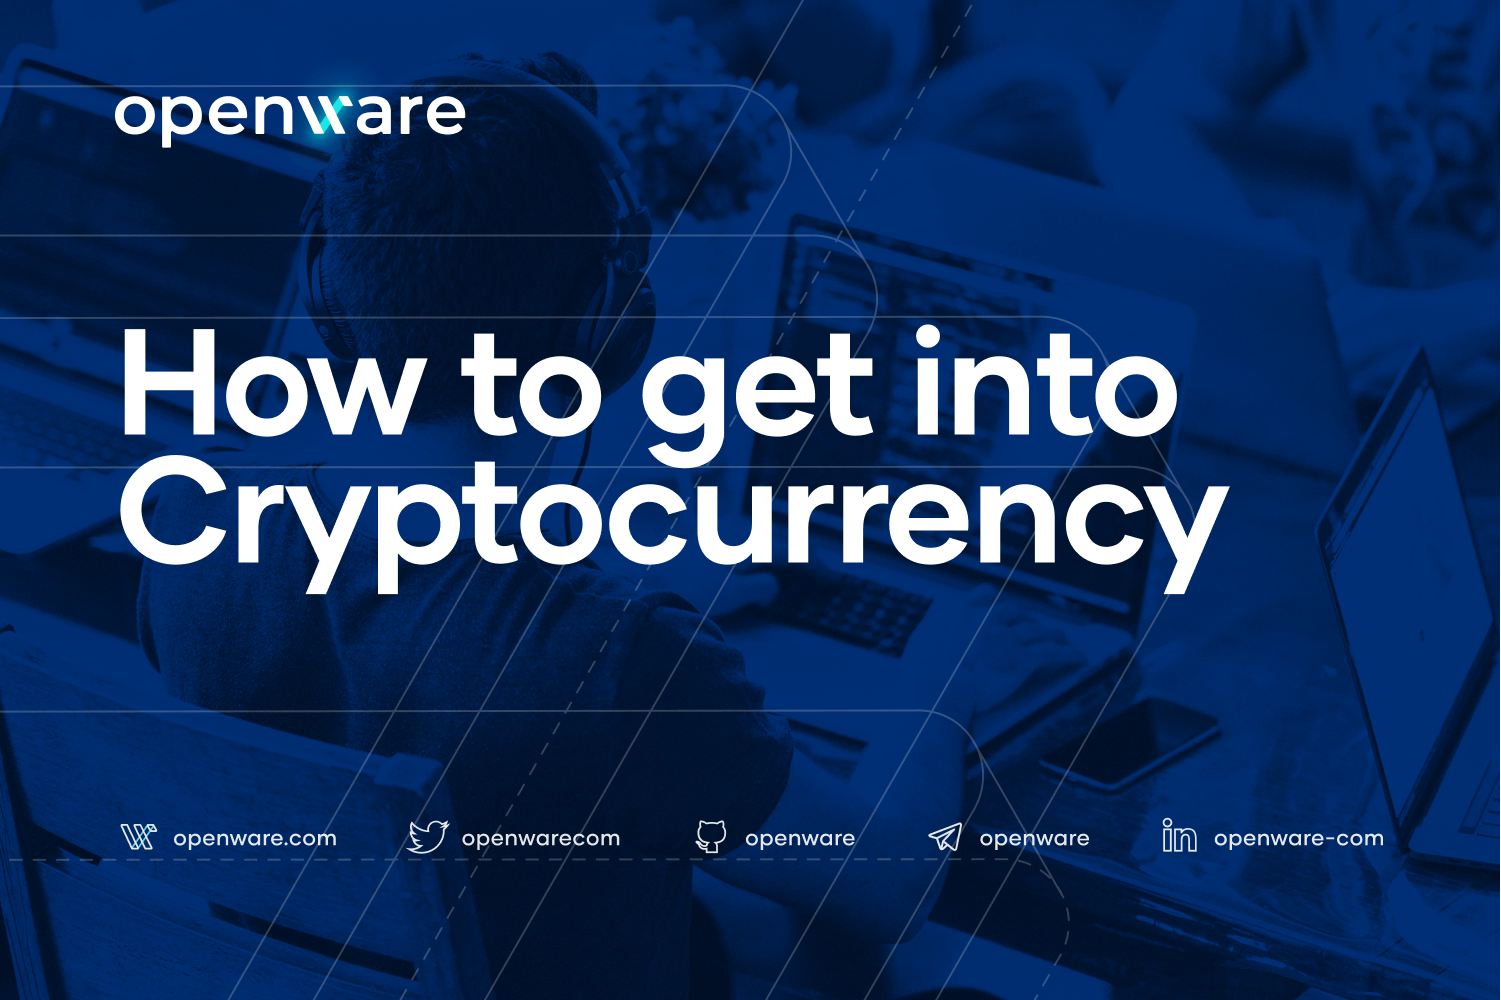 Blue tinted photo with the words "How to get into Cryptocurrency" written over it